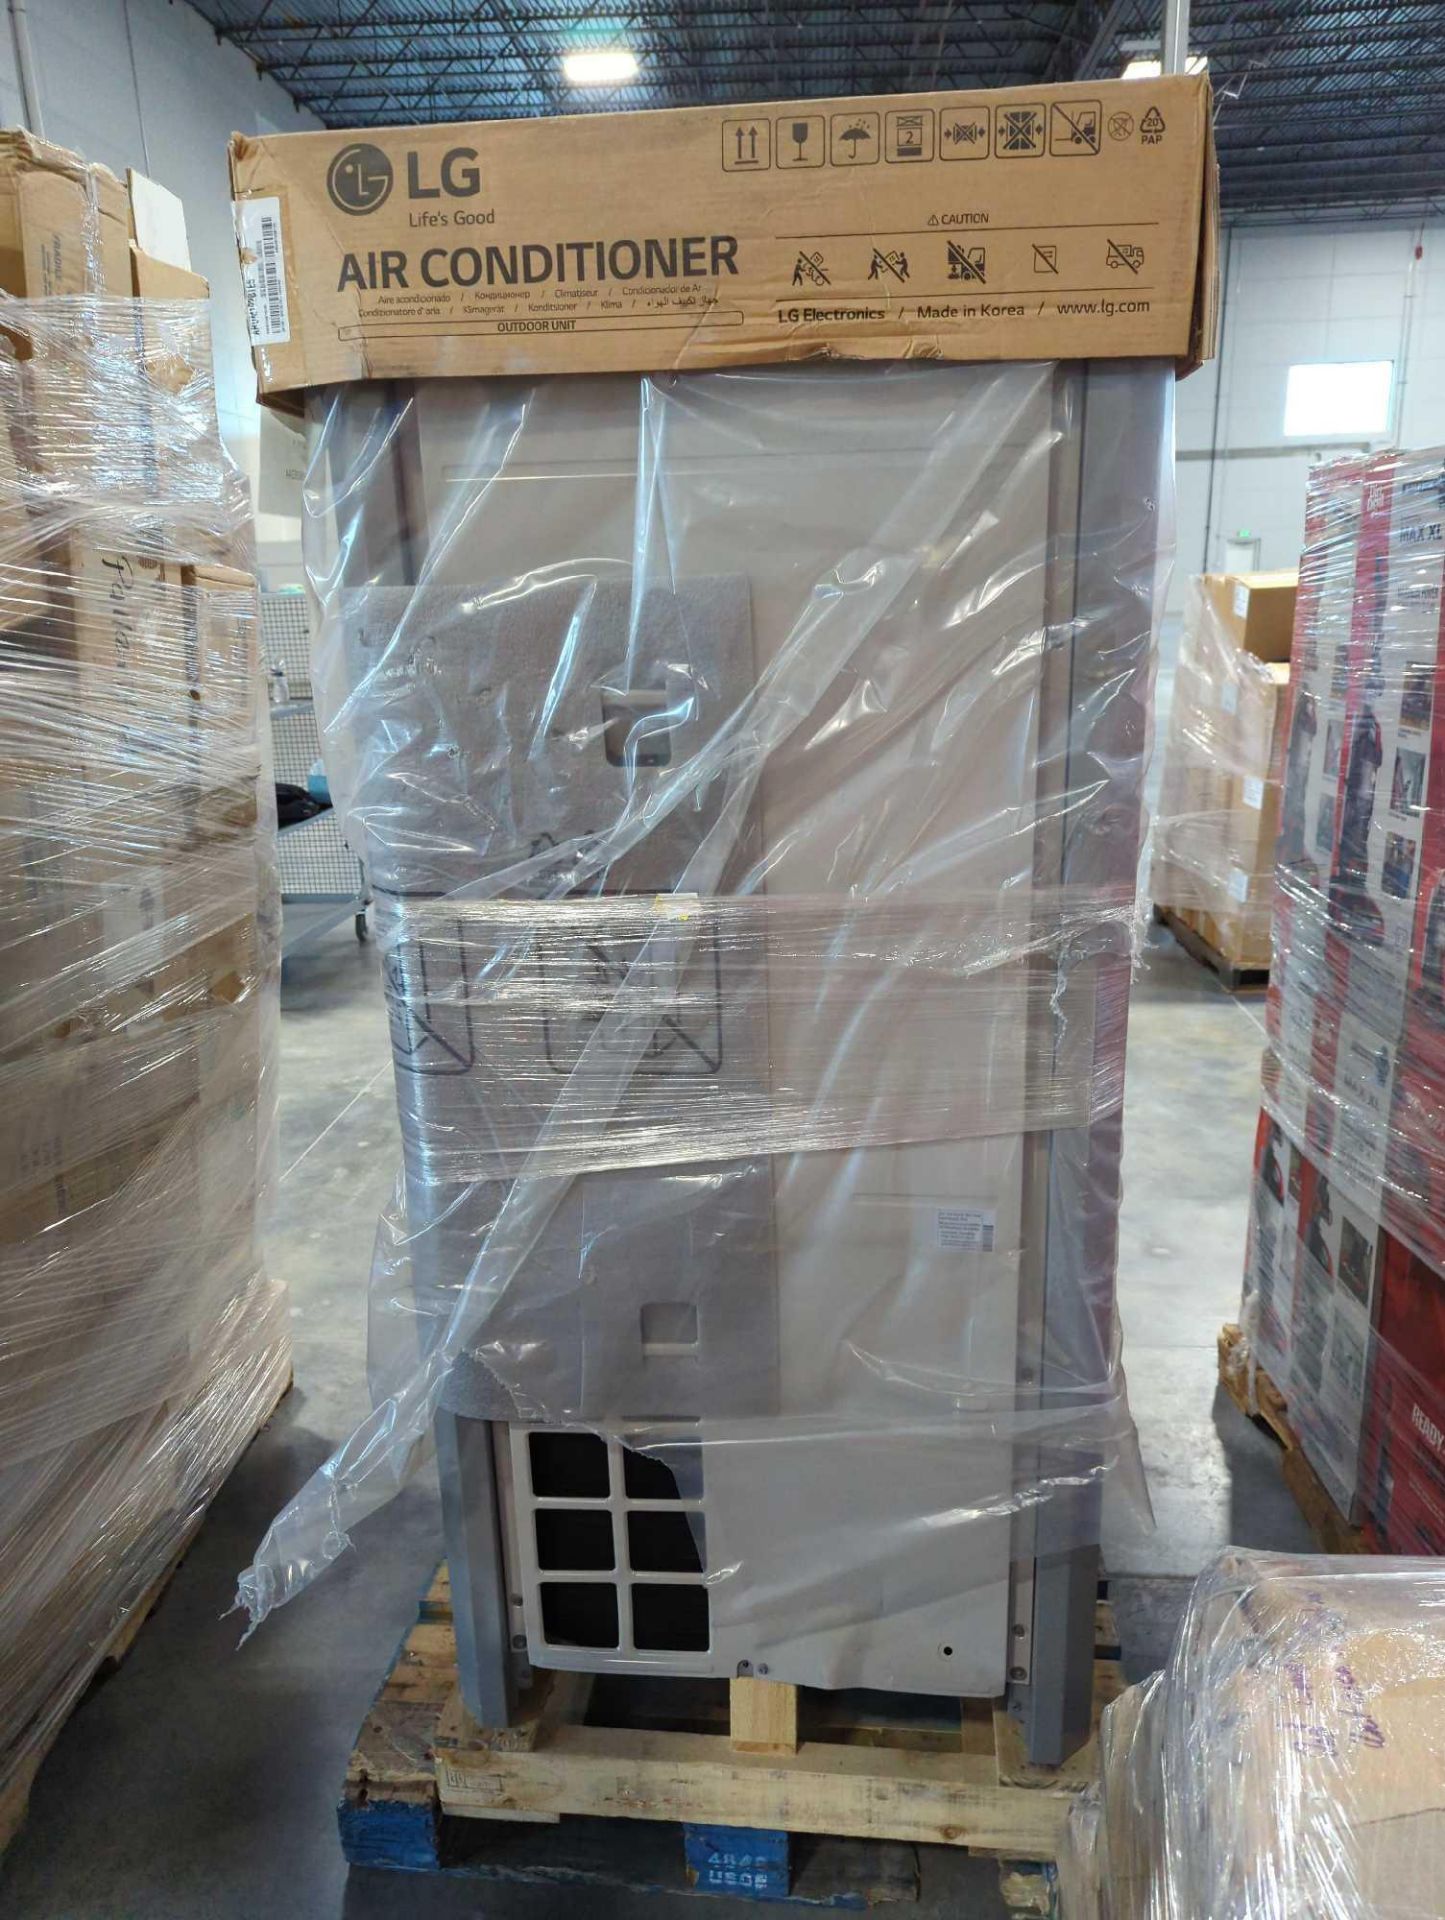 Air Conditioner - Image 5 of 6